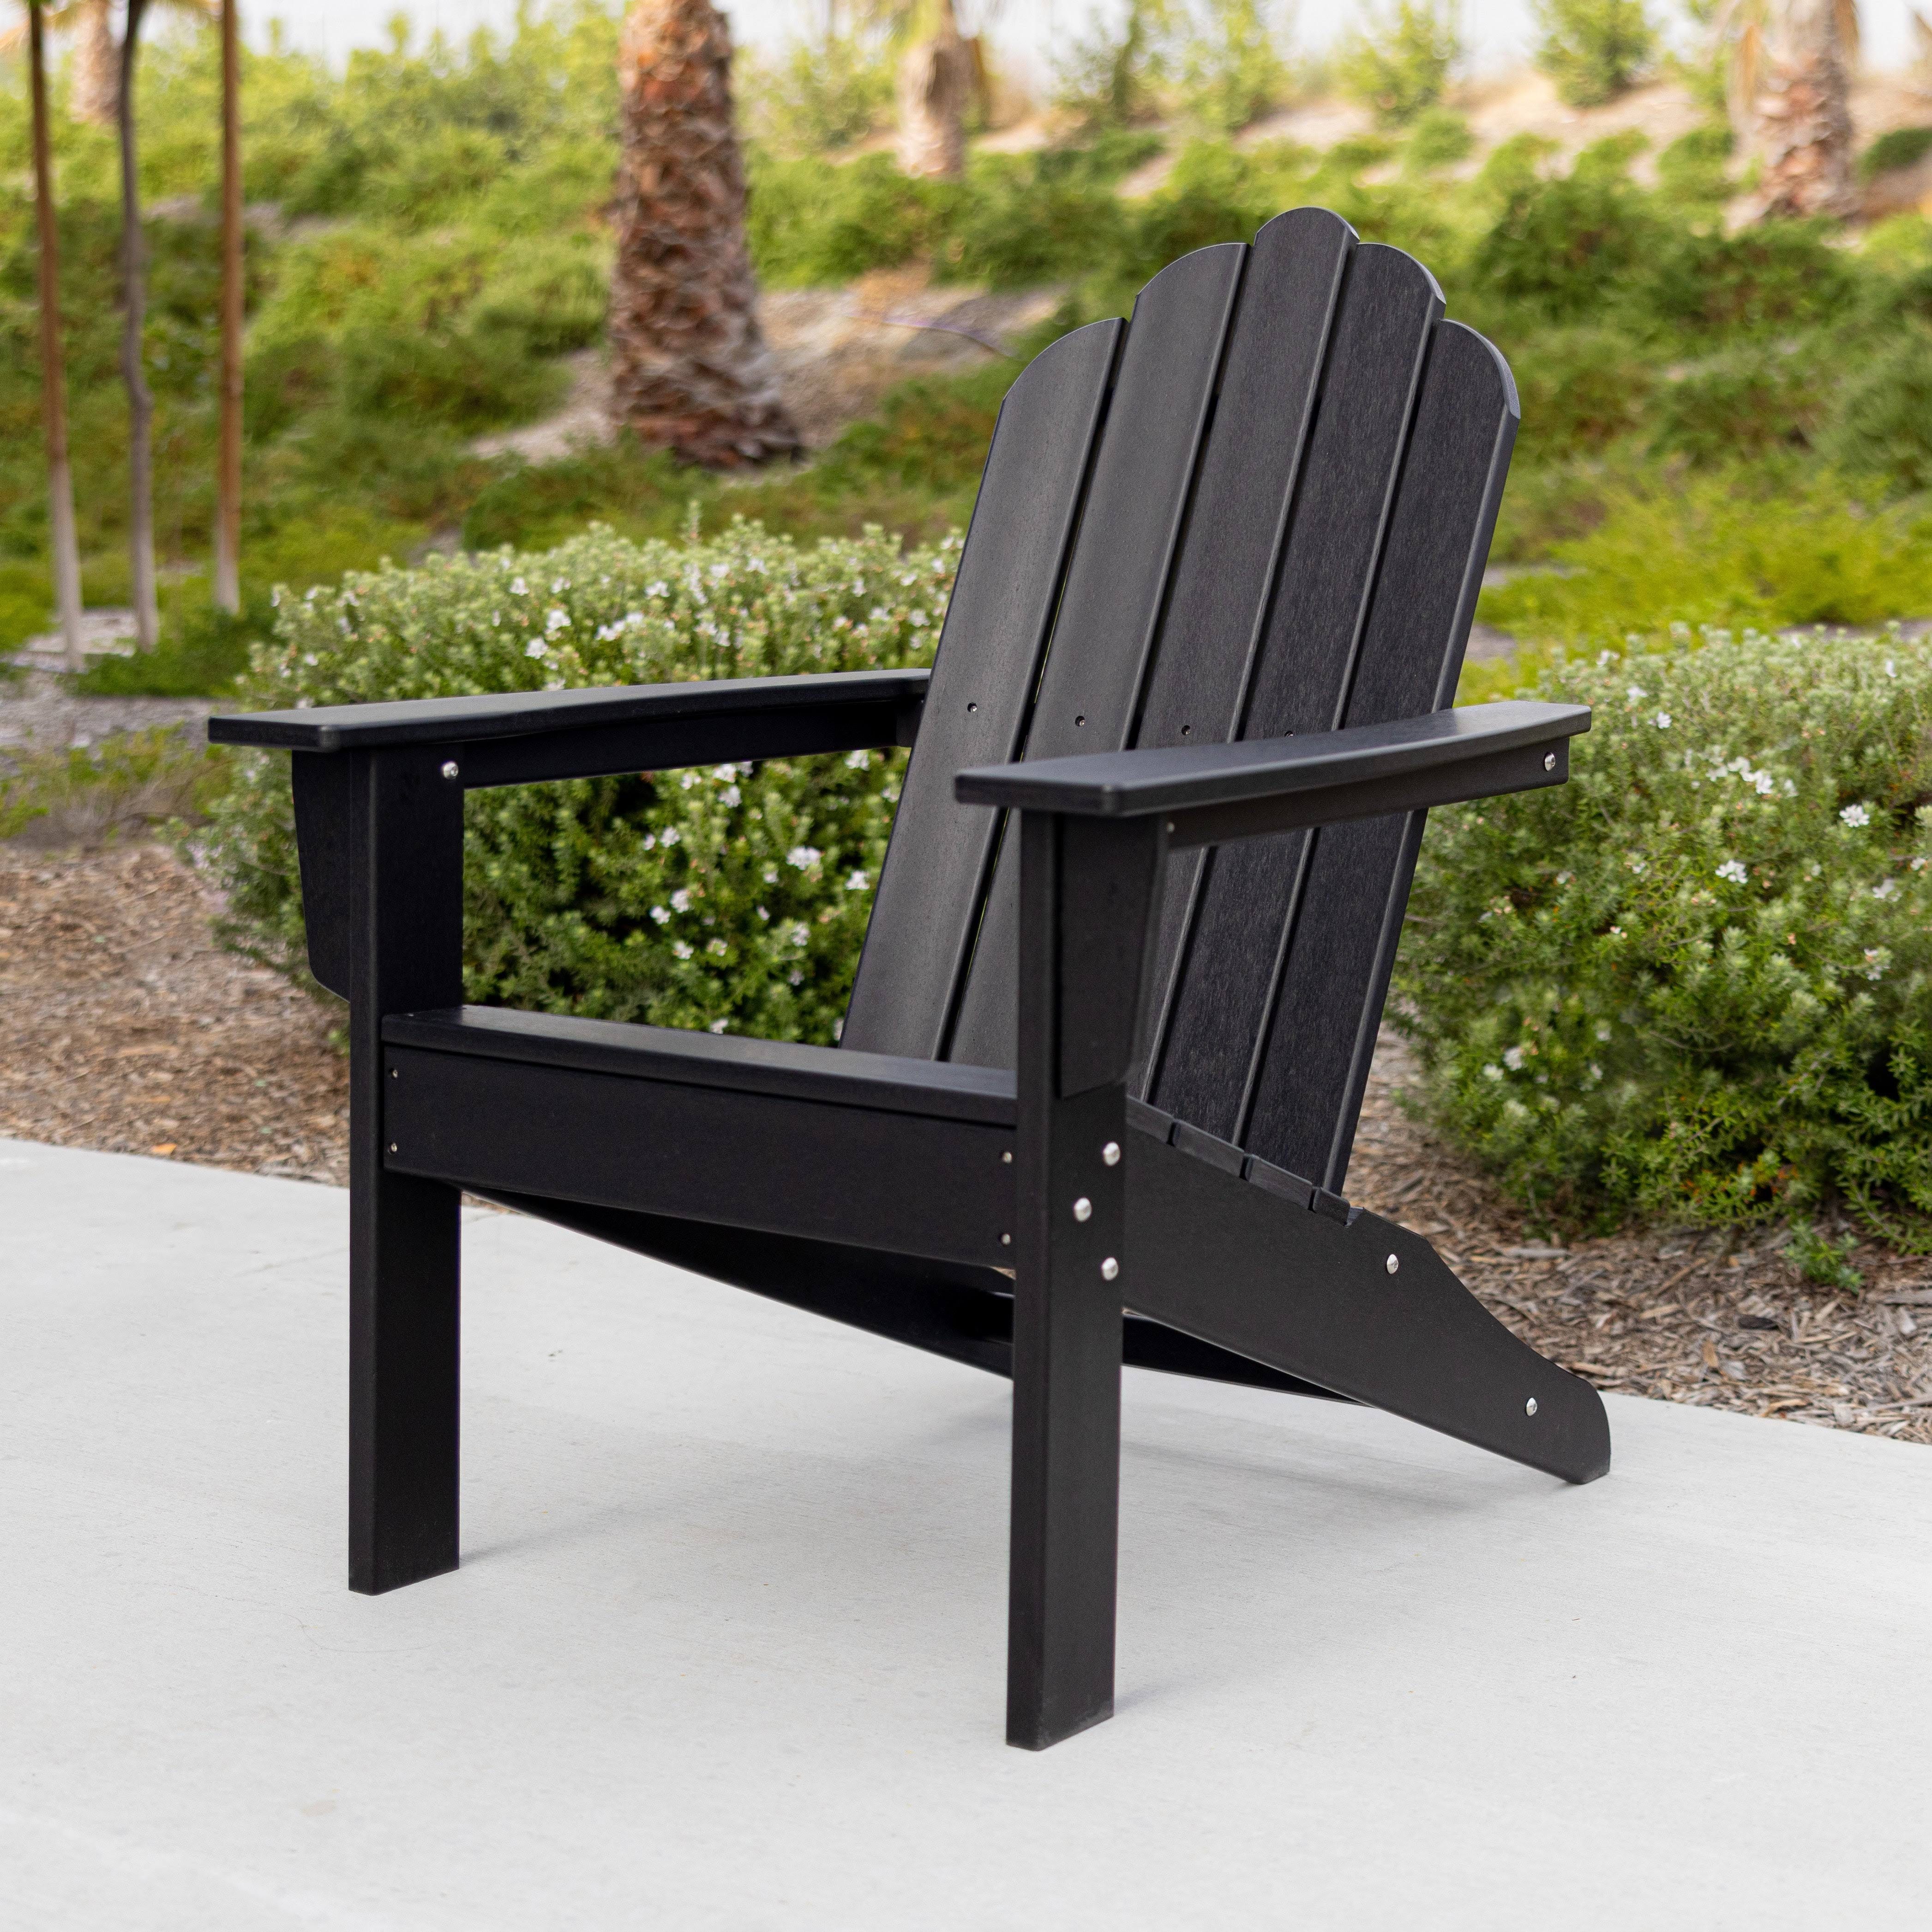 LuXeo Marina Black All-Weather Adirondack Chair with Recycled HDPE Material | Image